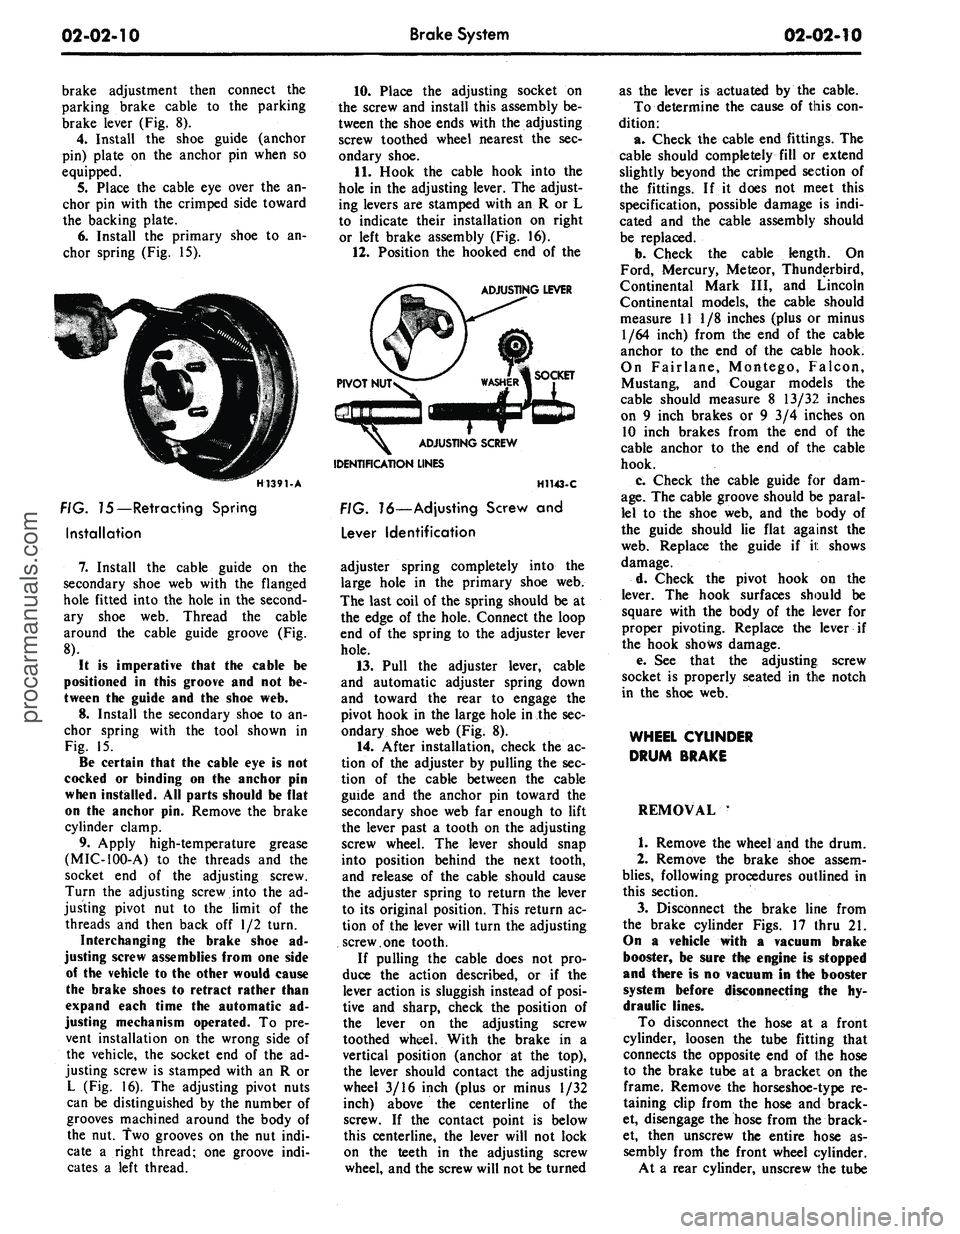 FORD MUSTANG 1969  Volume One Chassis 
02-02-10 
Brake System

02-02-10

brake adjustment then connect the

parking brake cable to the parking

brake lever (Fig. 8).

4.
 Install the shoe guide (anchor

pin) plate on the anchor pin when s